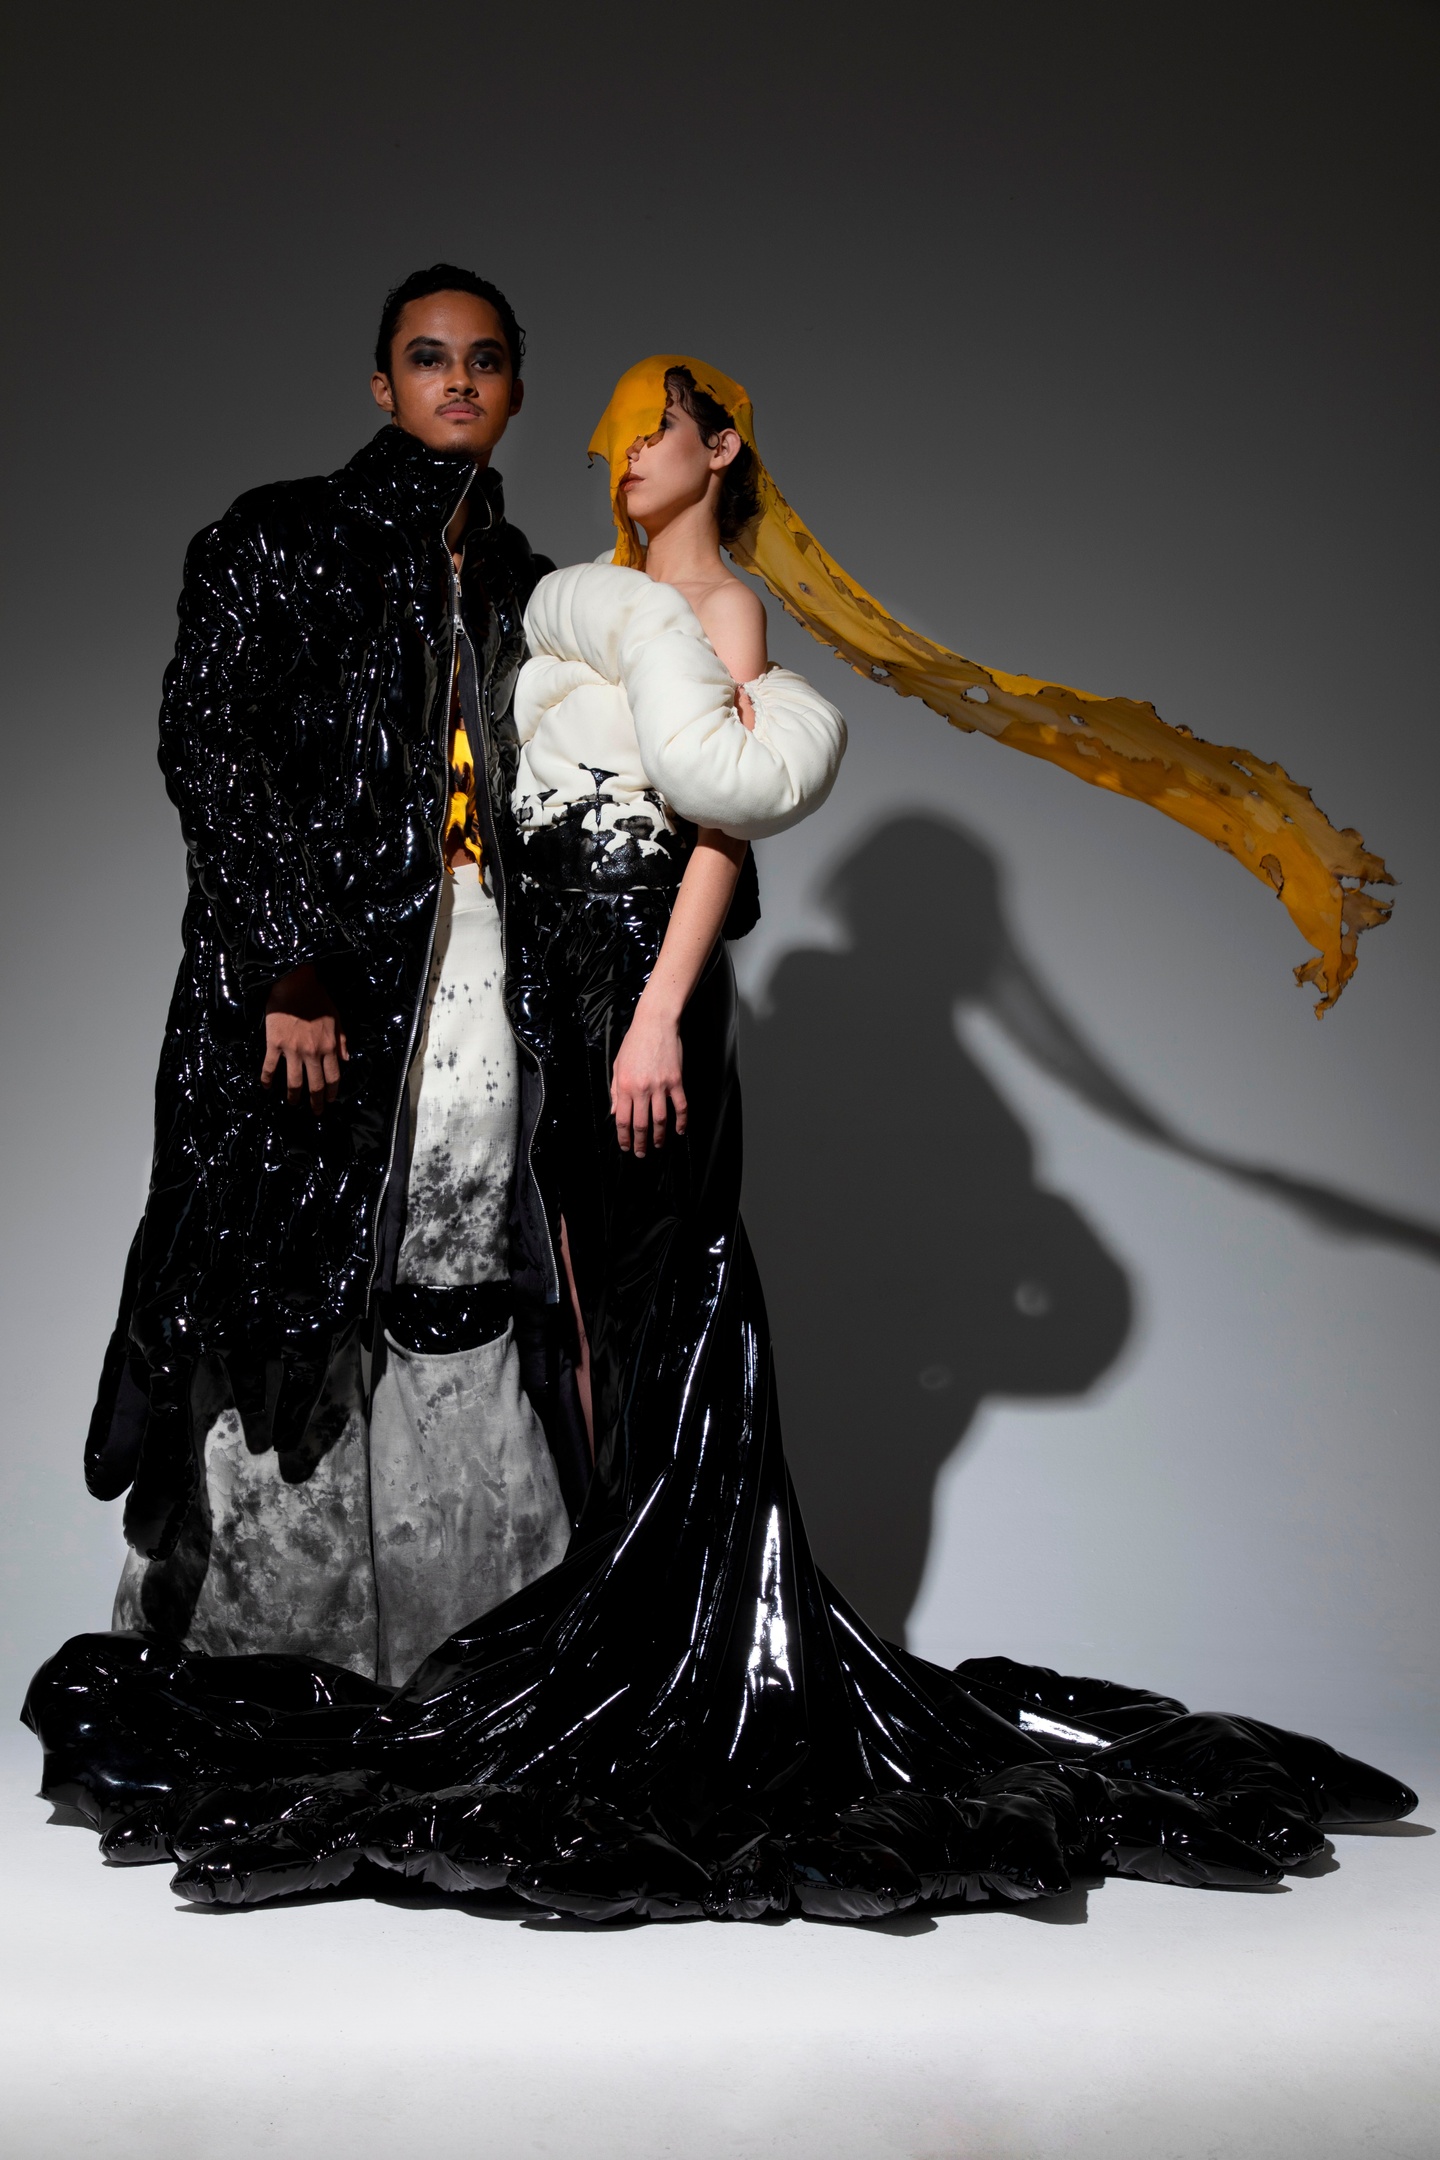 Two models wearing black and white with yellow accents outfits from the collection, Spiritual Erosion